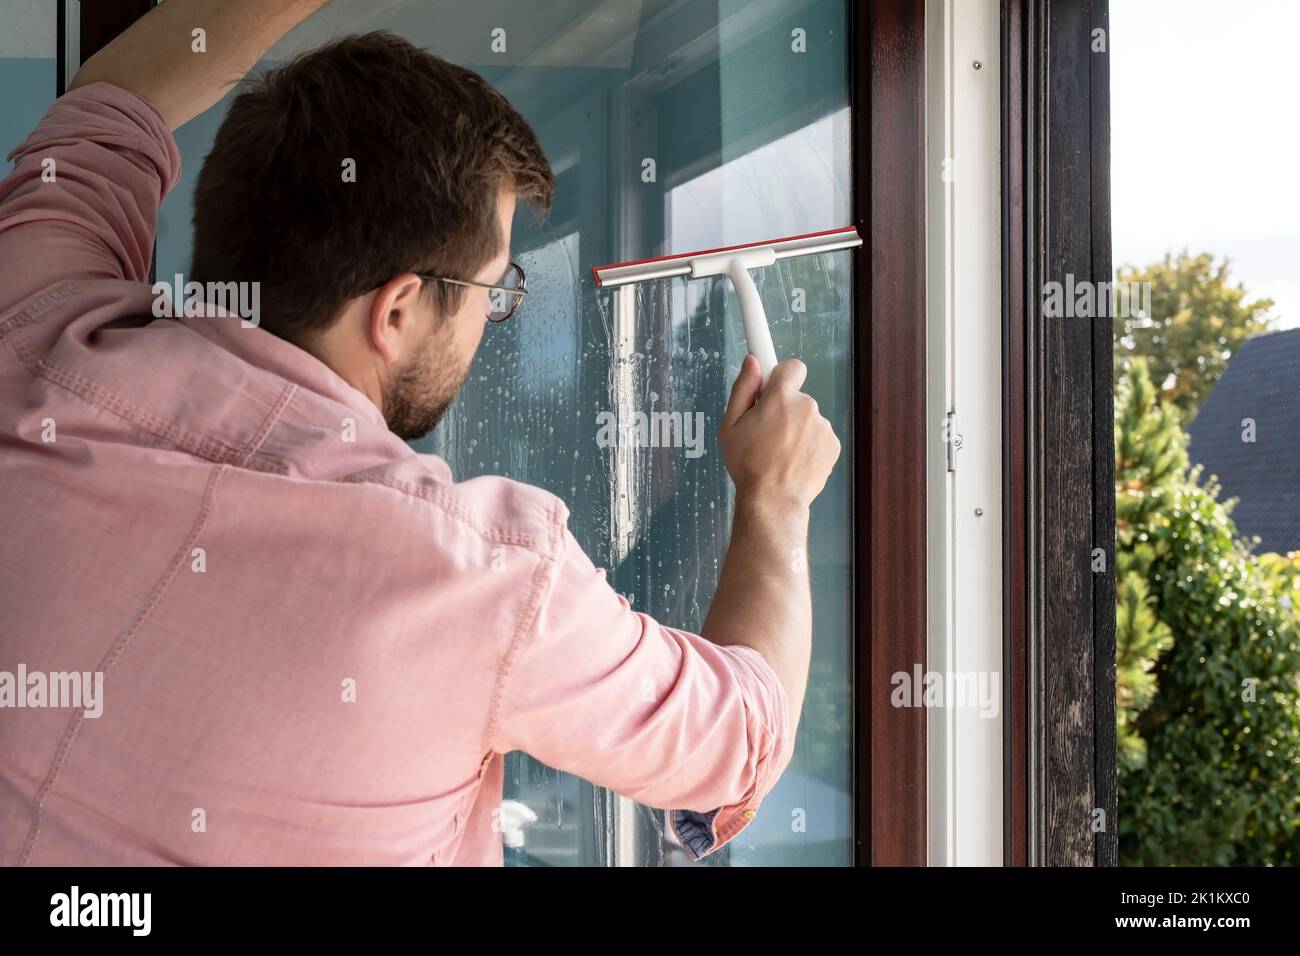 Man opened the window sash and washes the glass from dust and dirt using a special scraper tool. Cleaning. Stock Photo